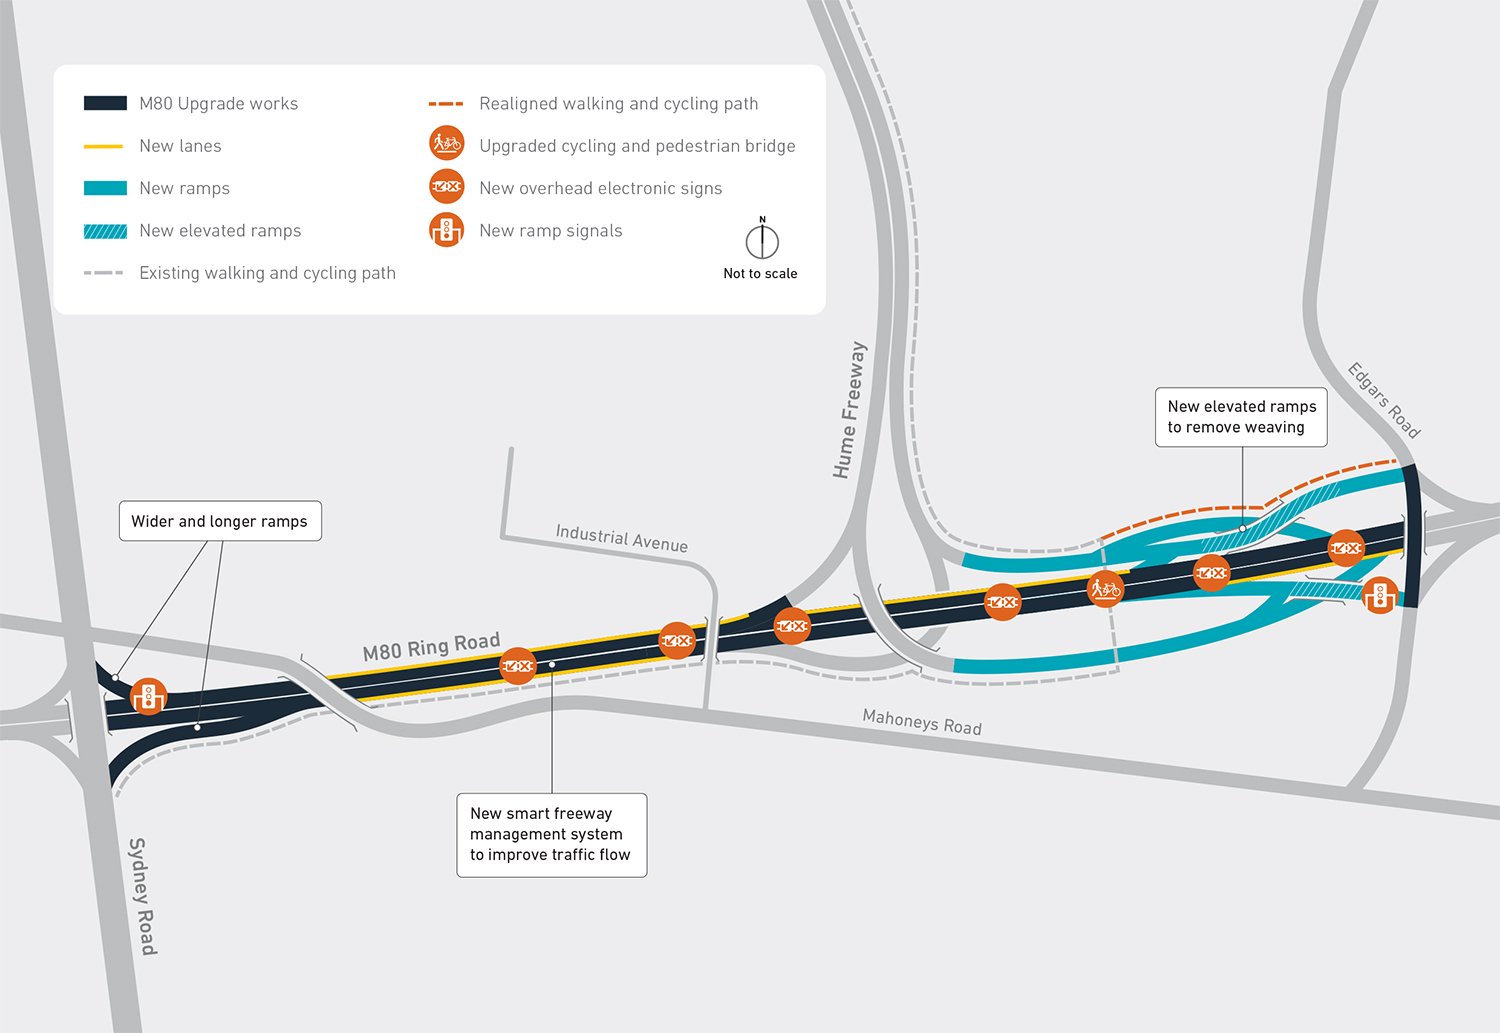 M80-Upgrade-Syd-Rd-to-Edgars-Rd-November-2019-update-2